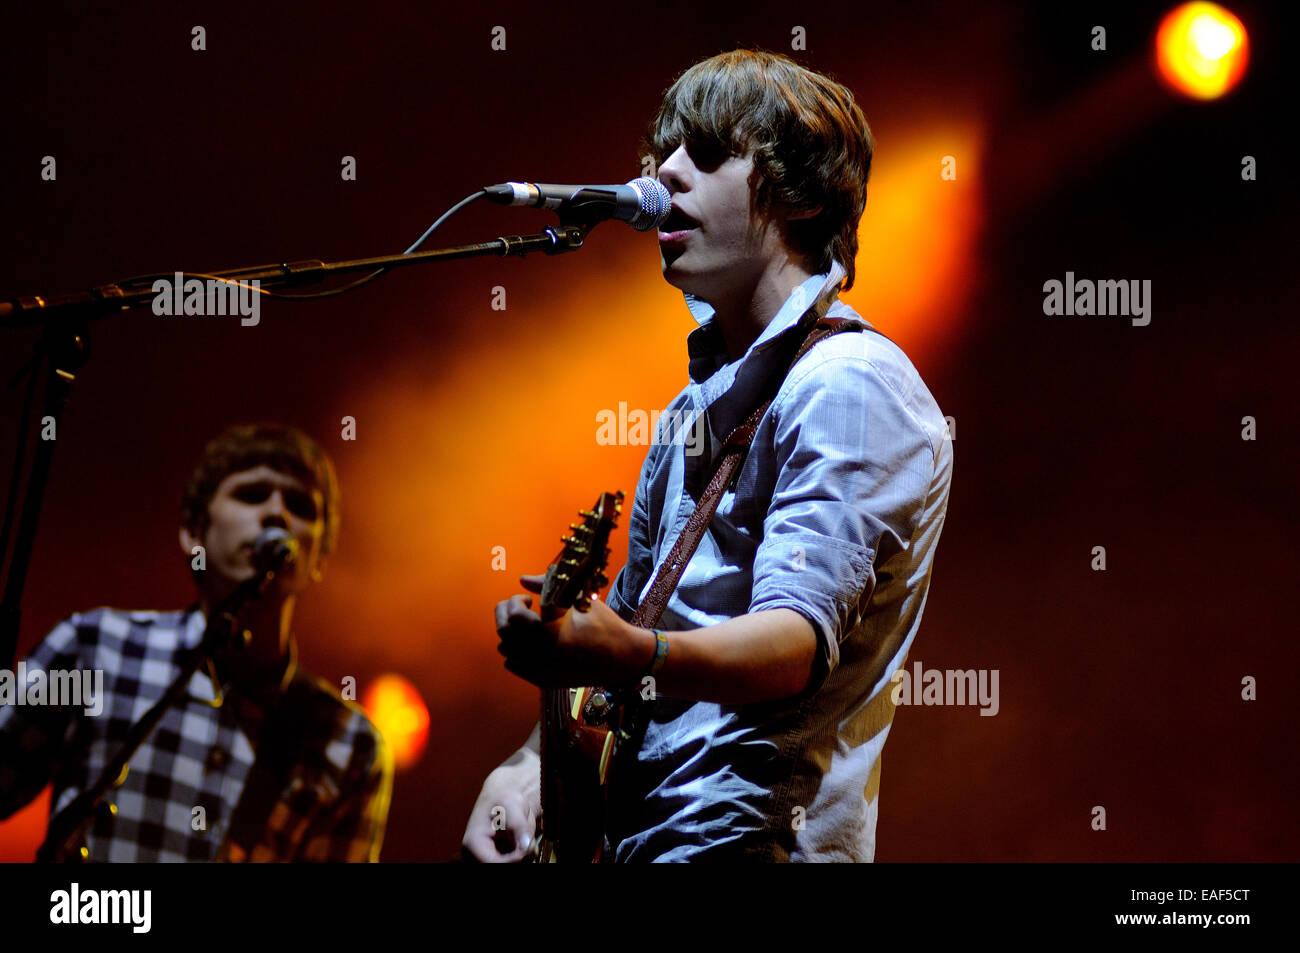 BENICASIM, SPAIN - JULY 21: Jake Bugg, known as the new Bob Dylan, band concert performance at FIB. Stock Photo